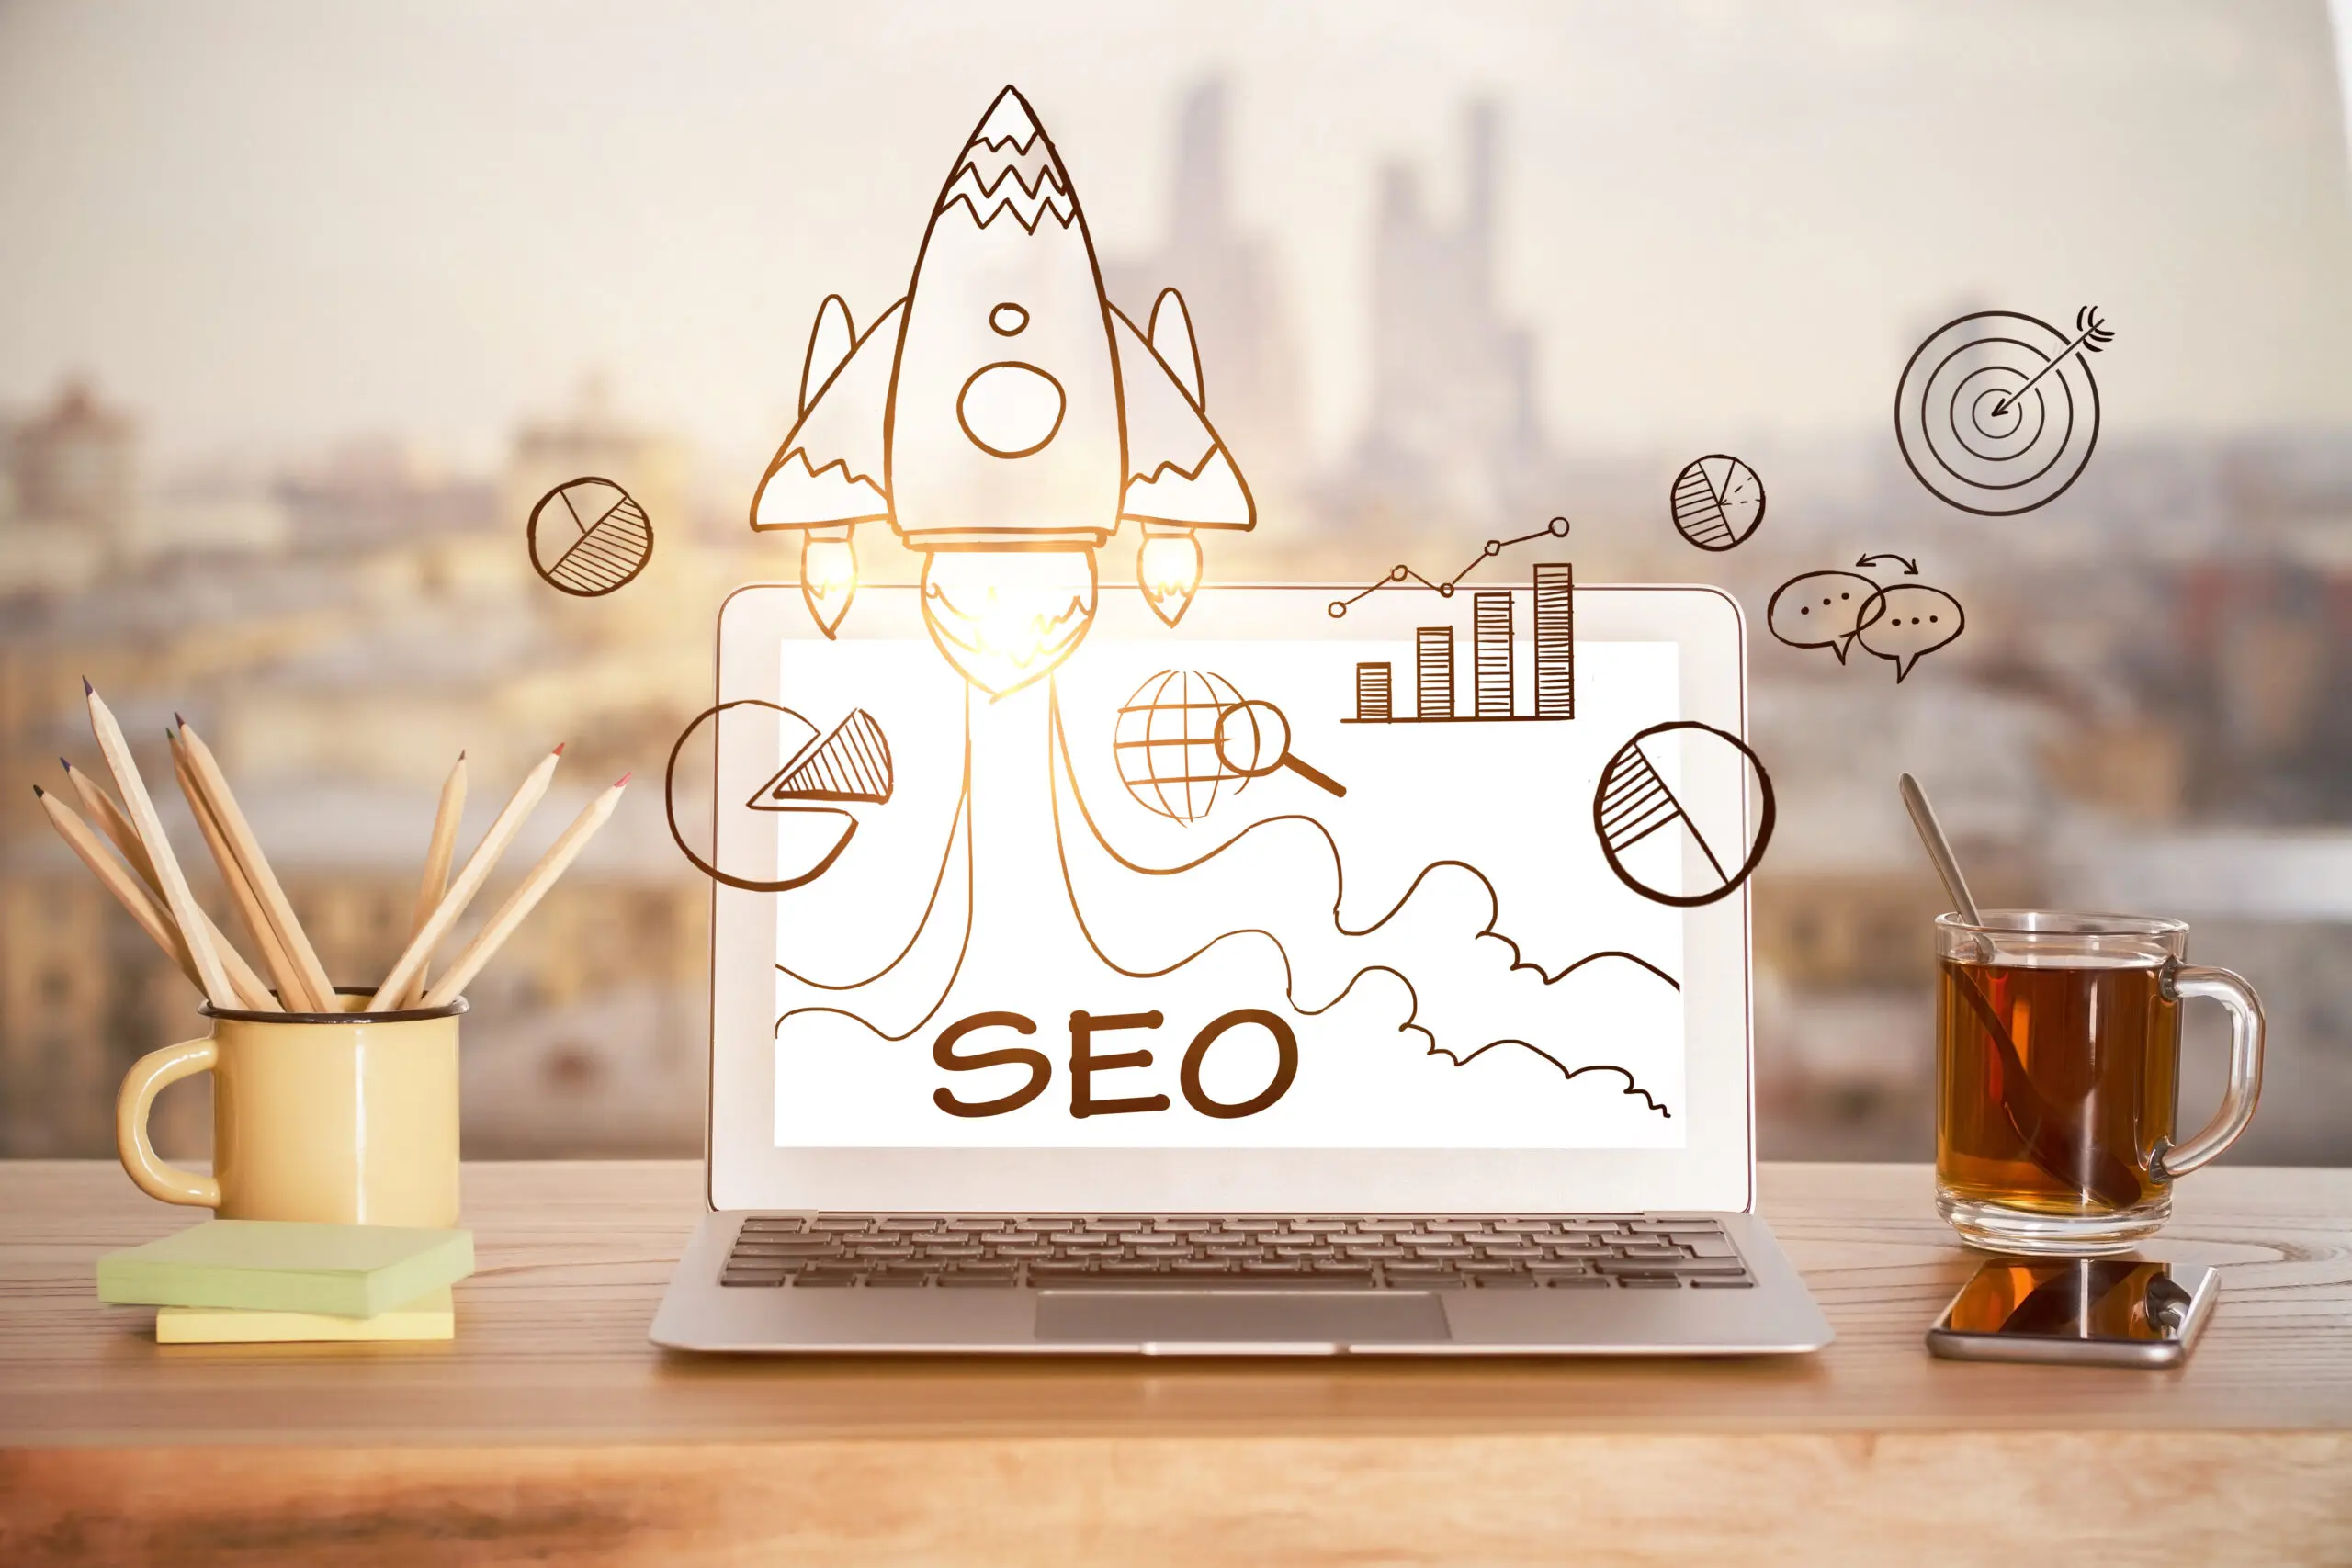 10 Effective SEO Strategies Every Small Business Should Implement